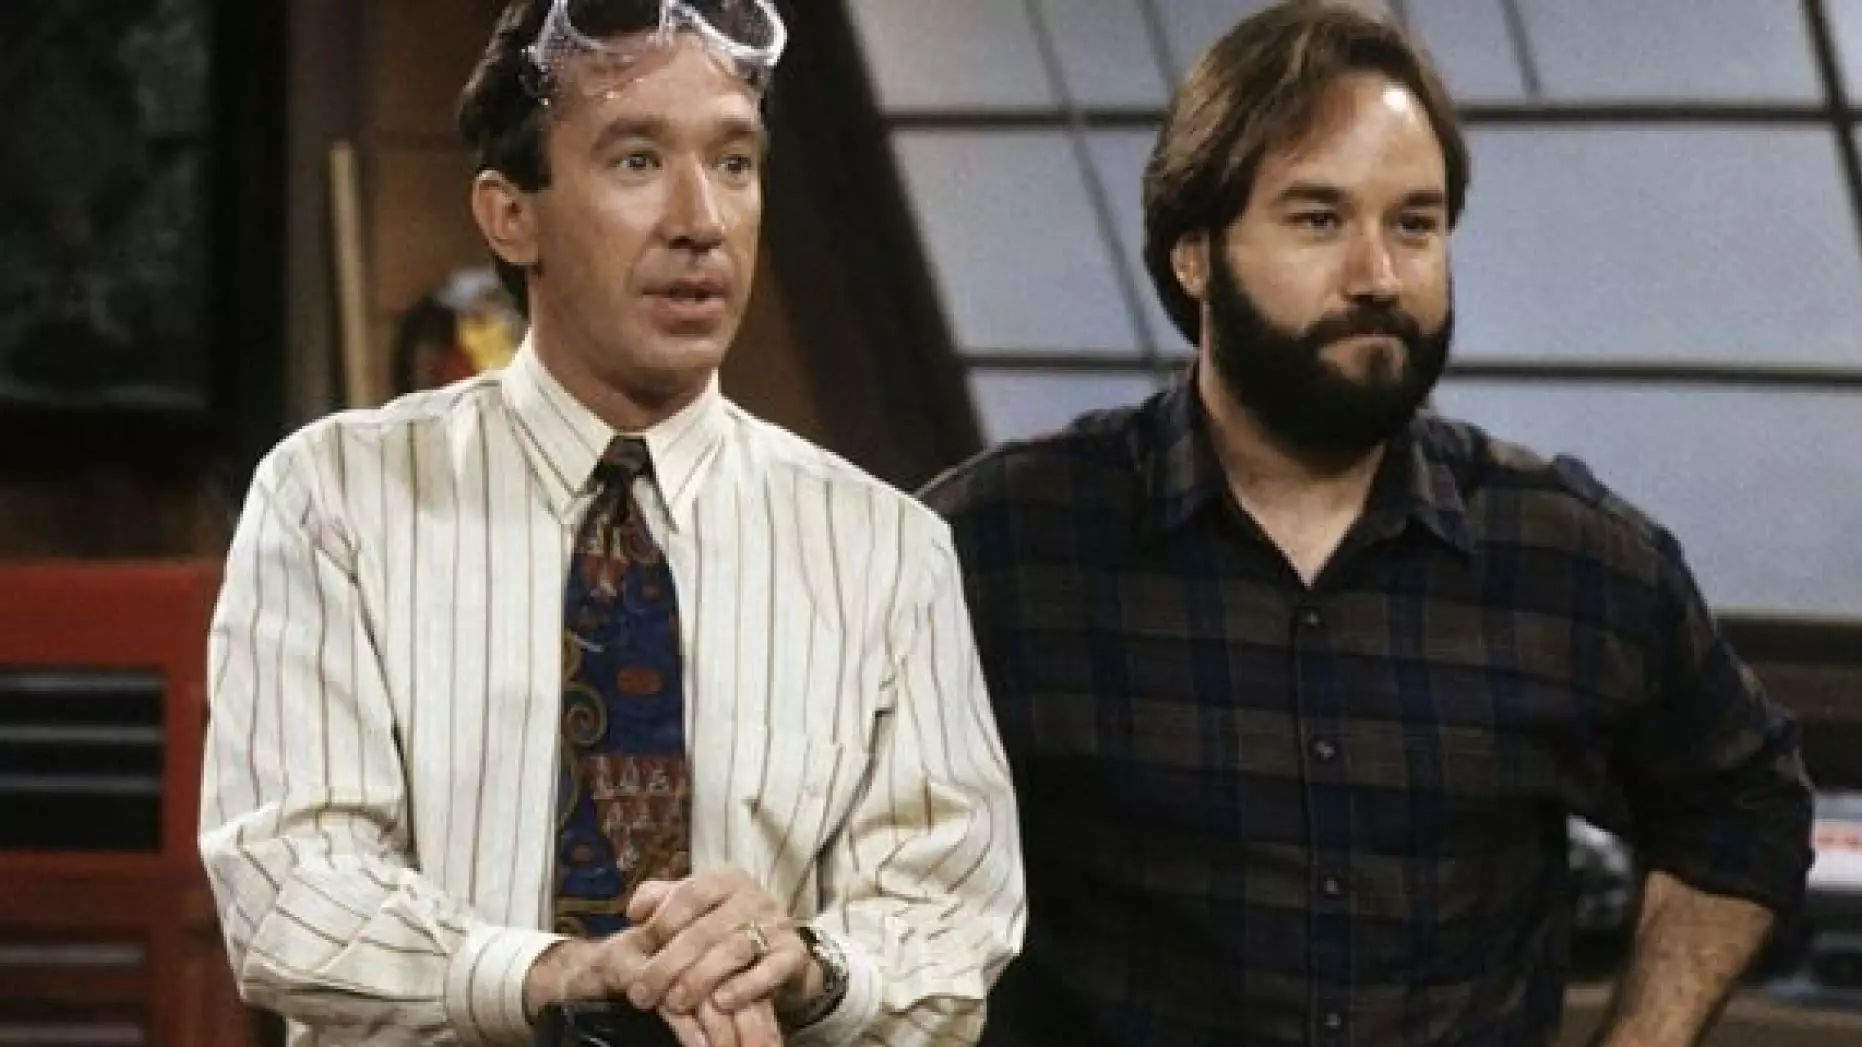 Tim Allen Is Up For Reviving 90s Classic Home Improvement As A 'One-Off' Movie